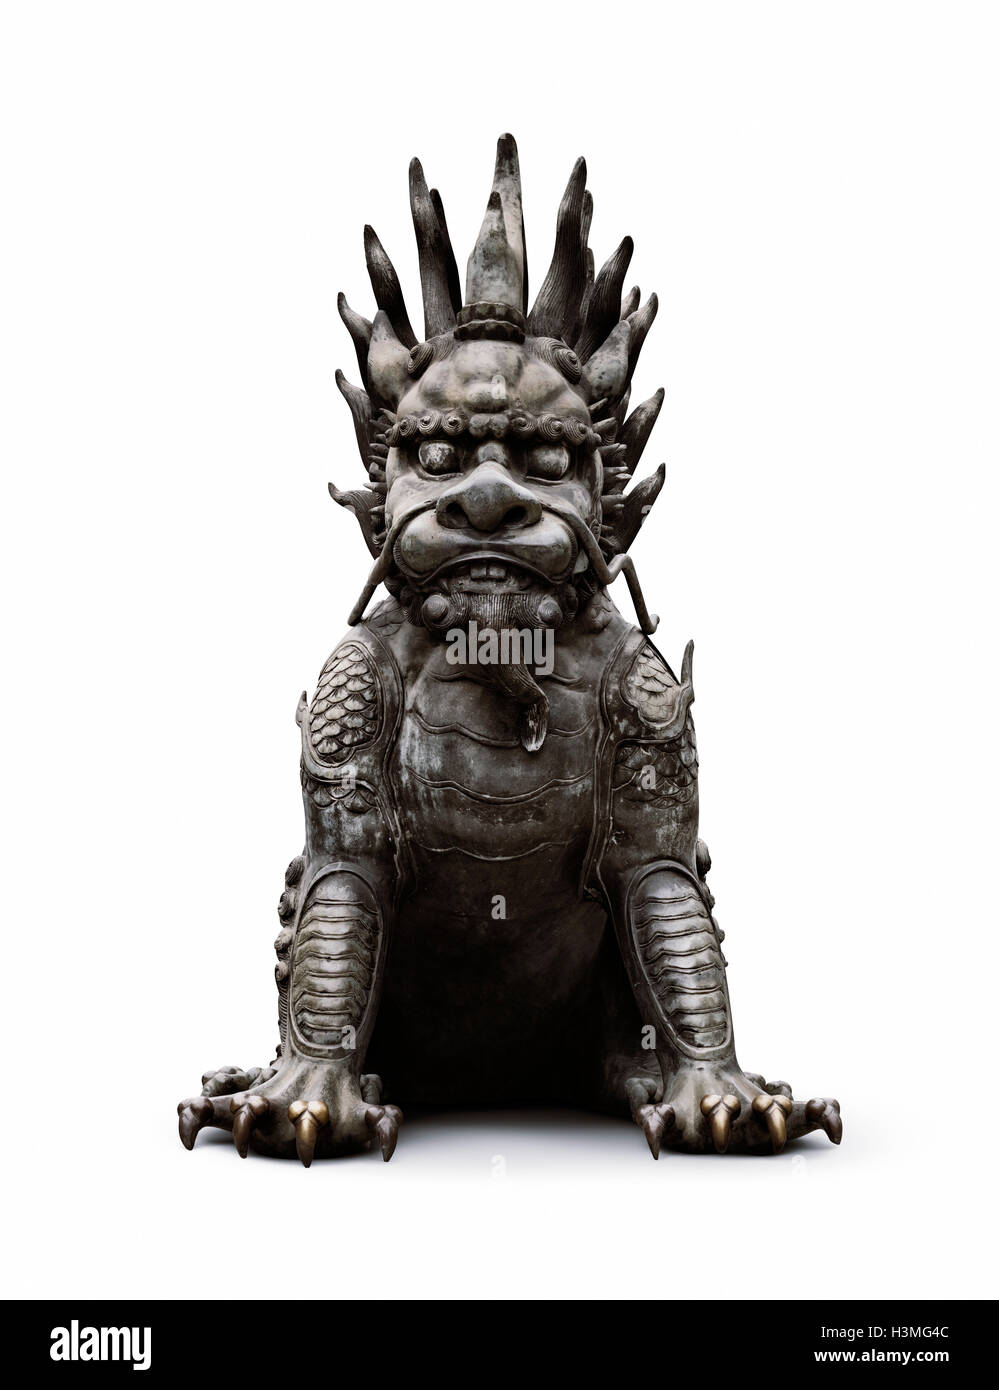 License available at MaximImages.com - Chinese Guardian Lion bronze statue, Foo Dog, Gate Keeper isolated on white background with clipping path Stock Photo